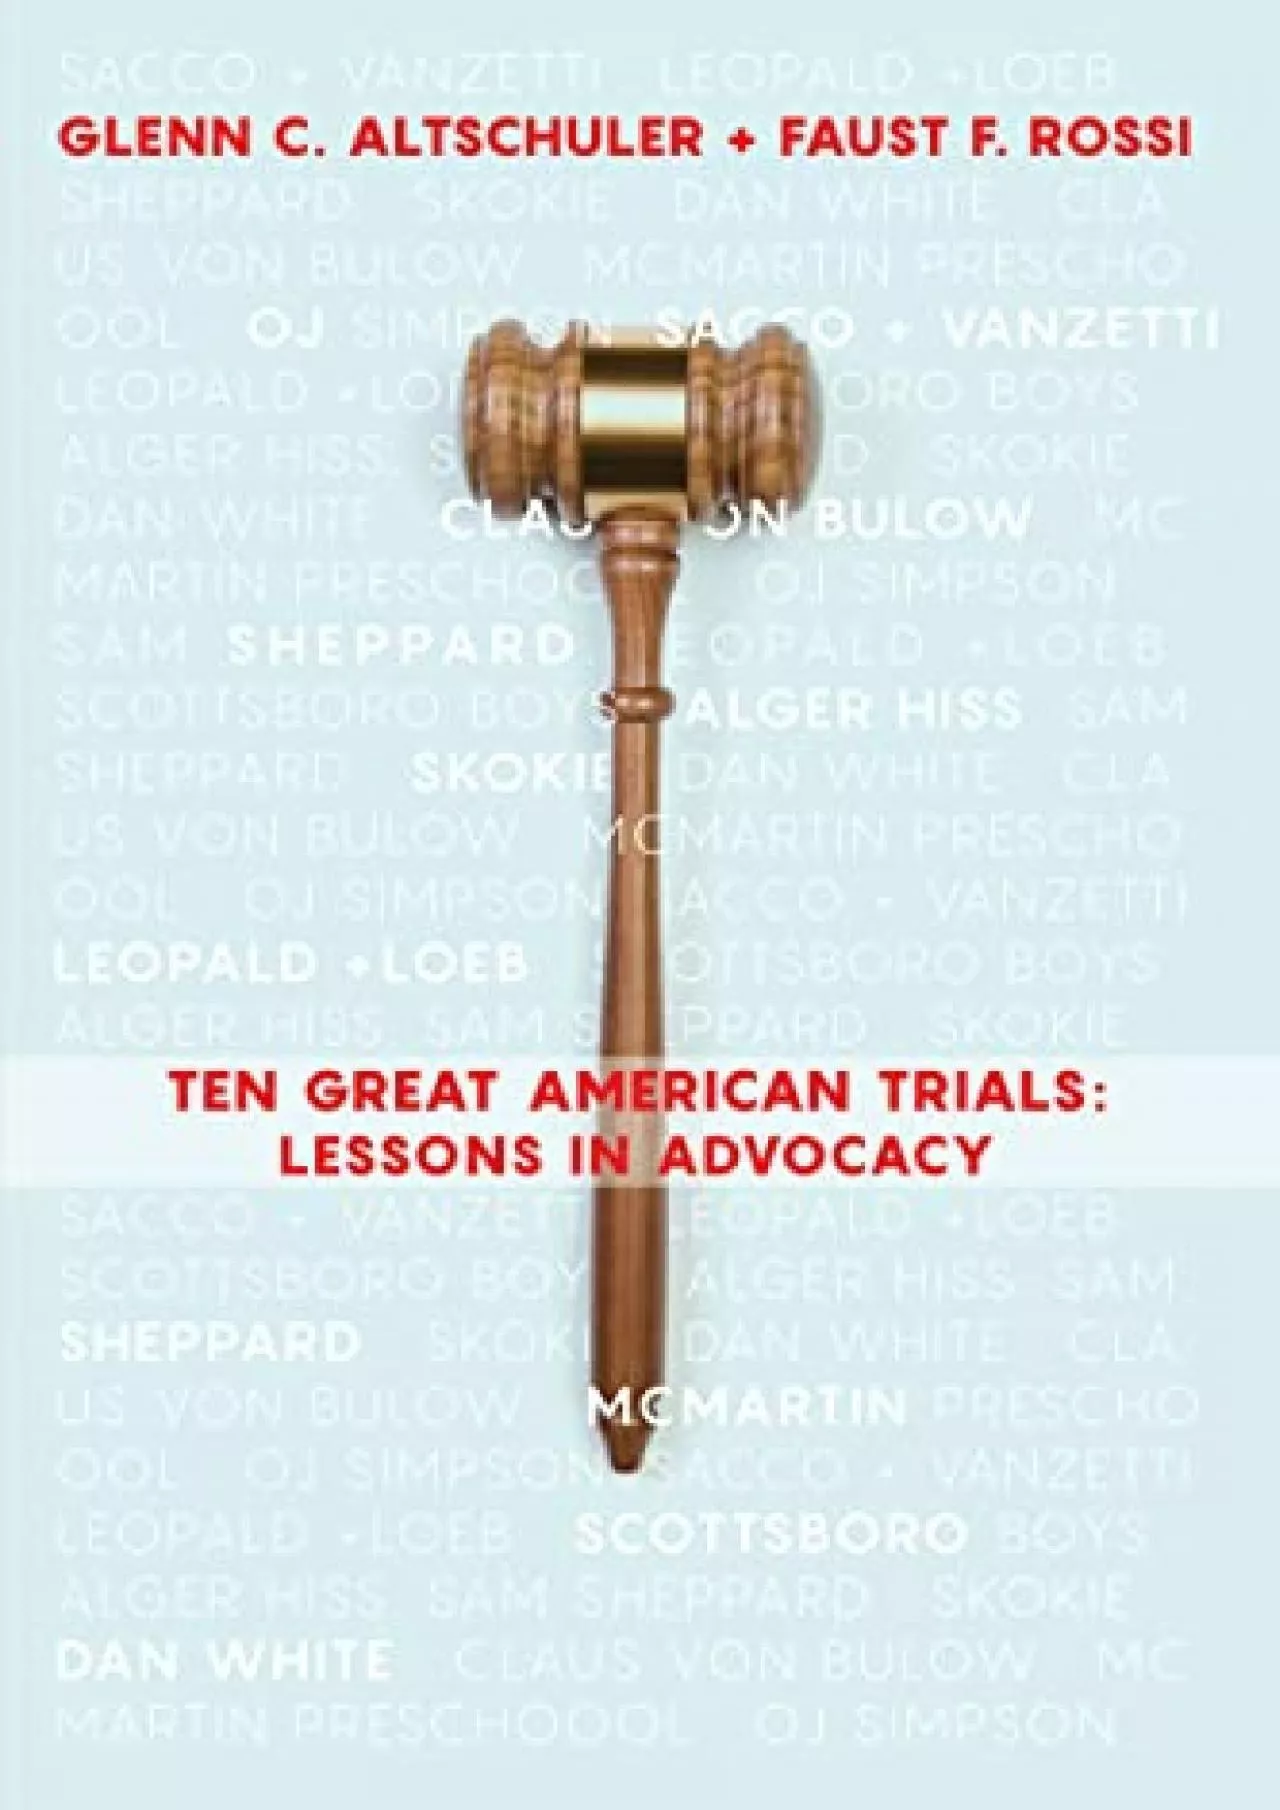 Download Book [PDF] Ten Great American Trials: Lessons in Advocacy